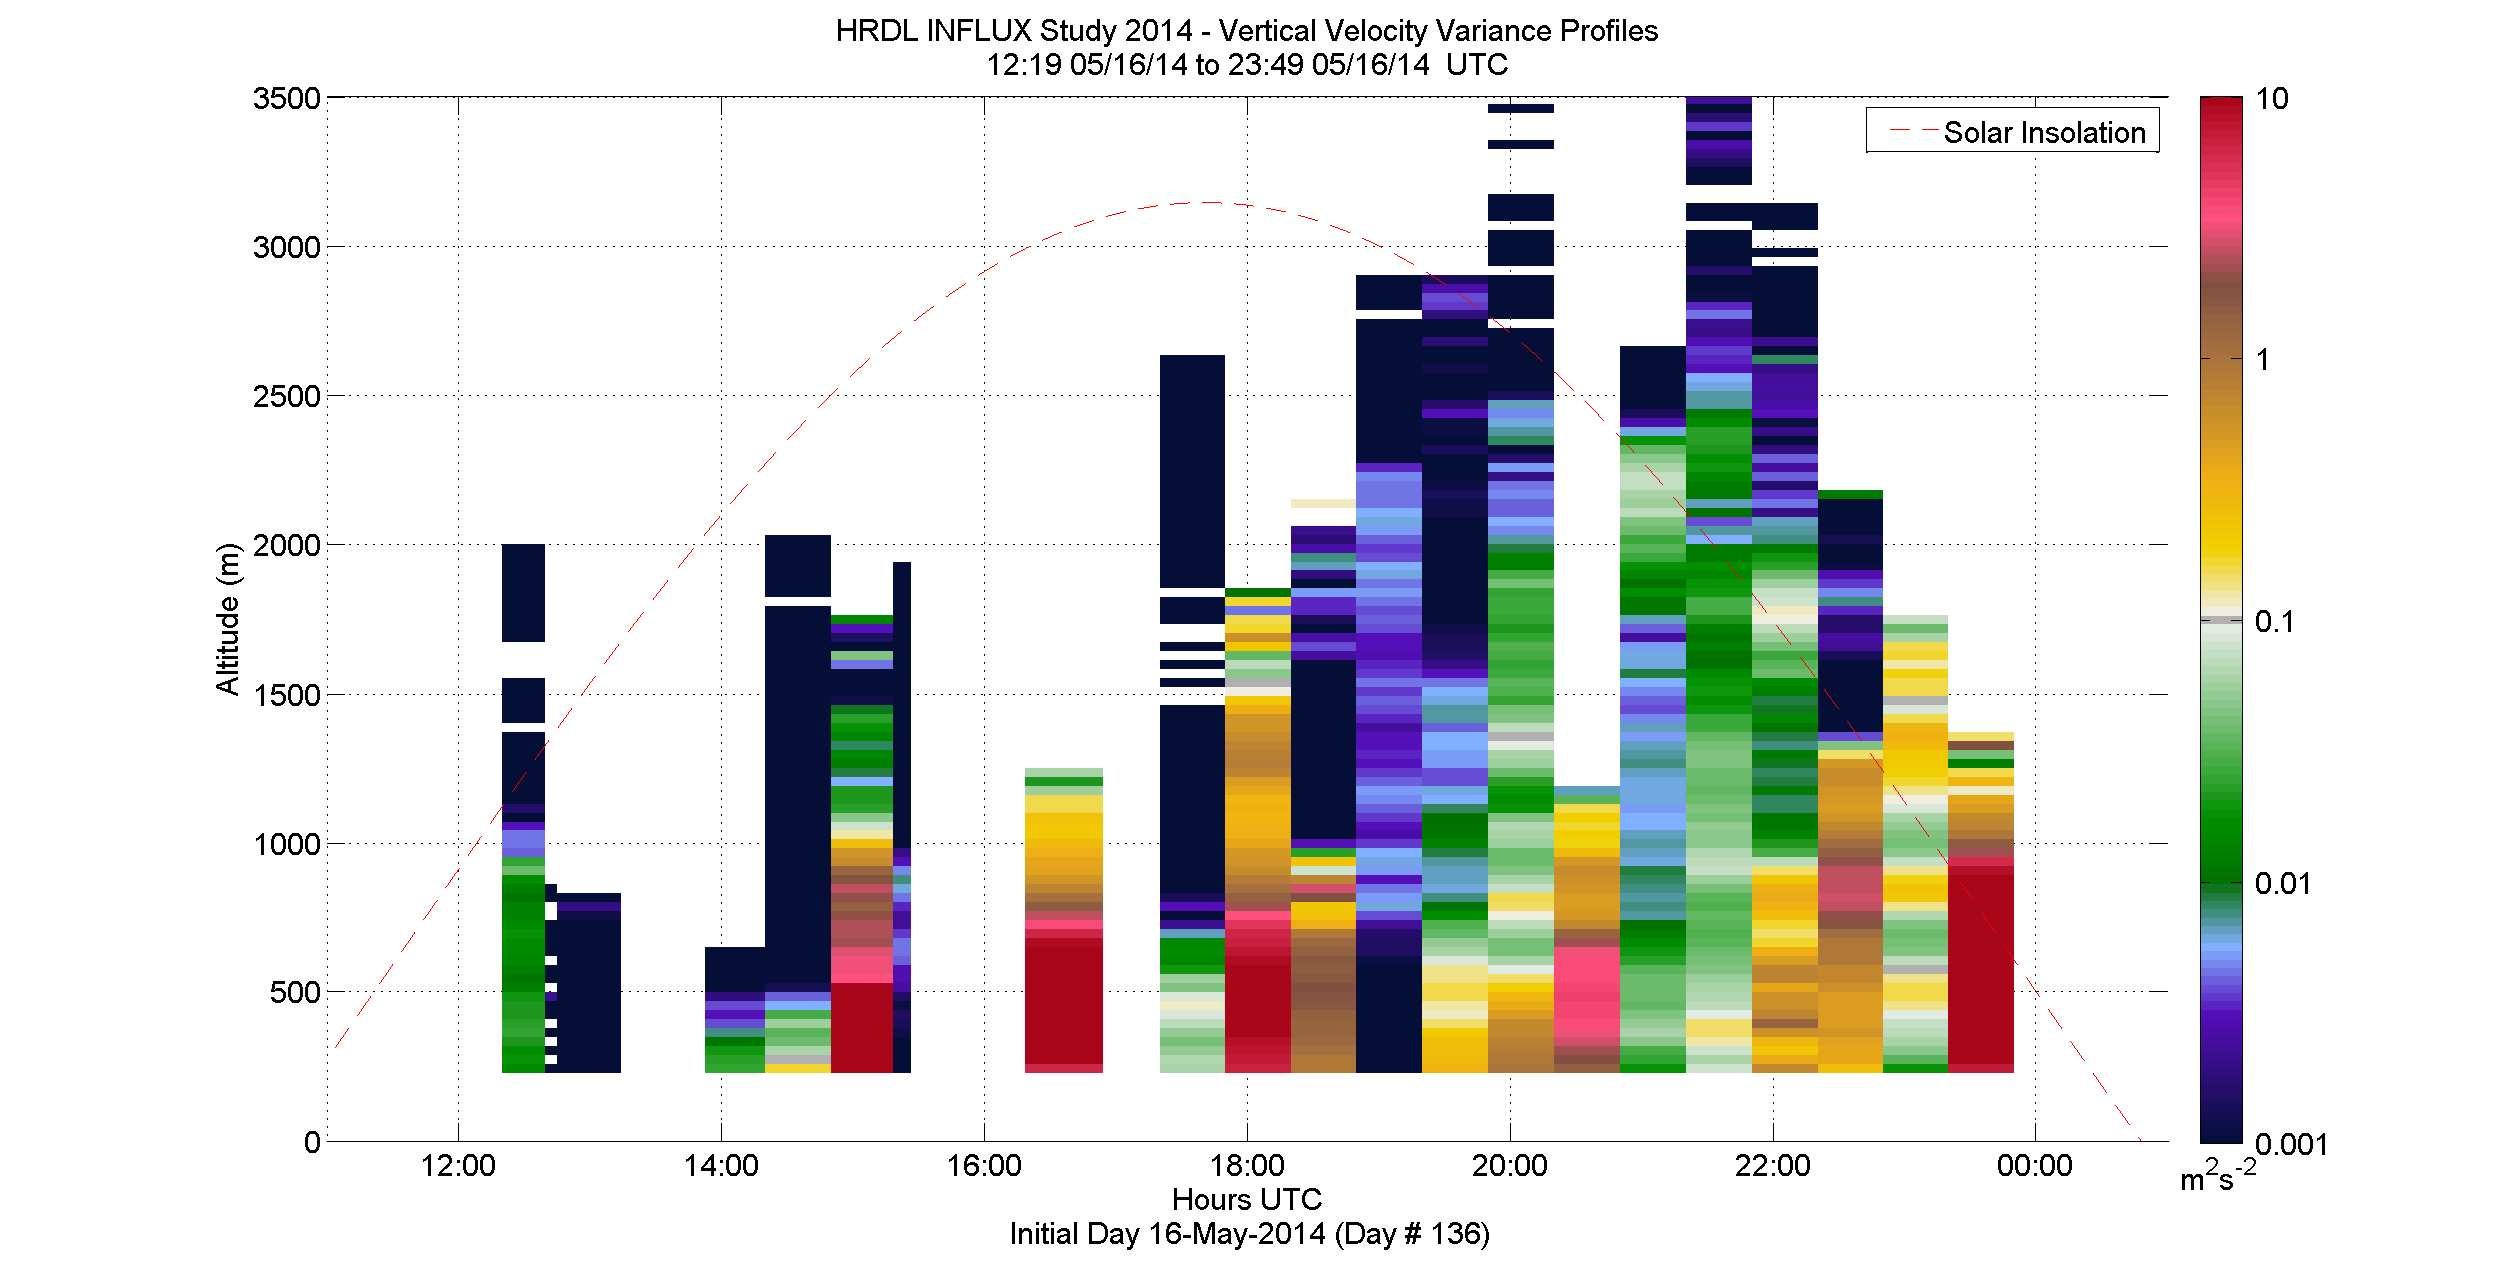 HRDL vertical velocity variance profile - May 16 pm